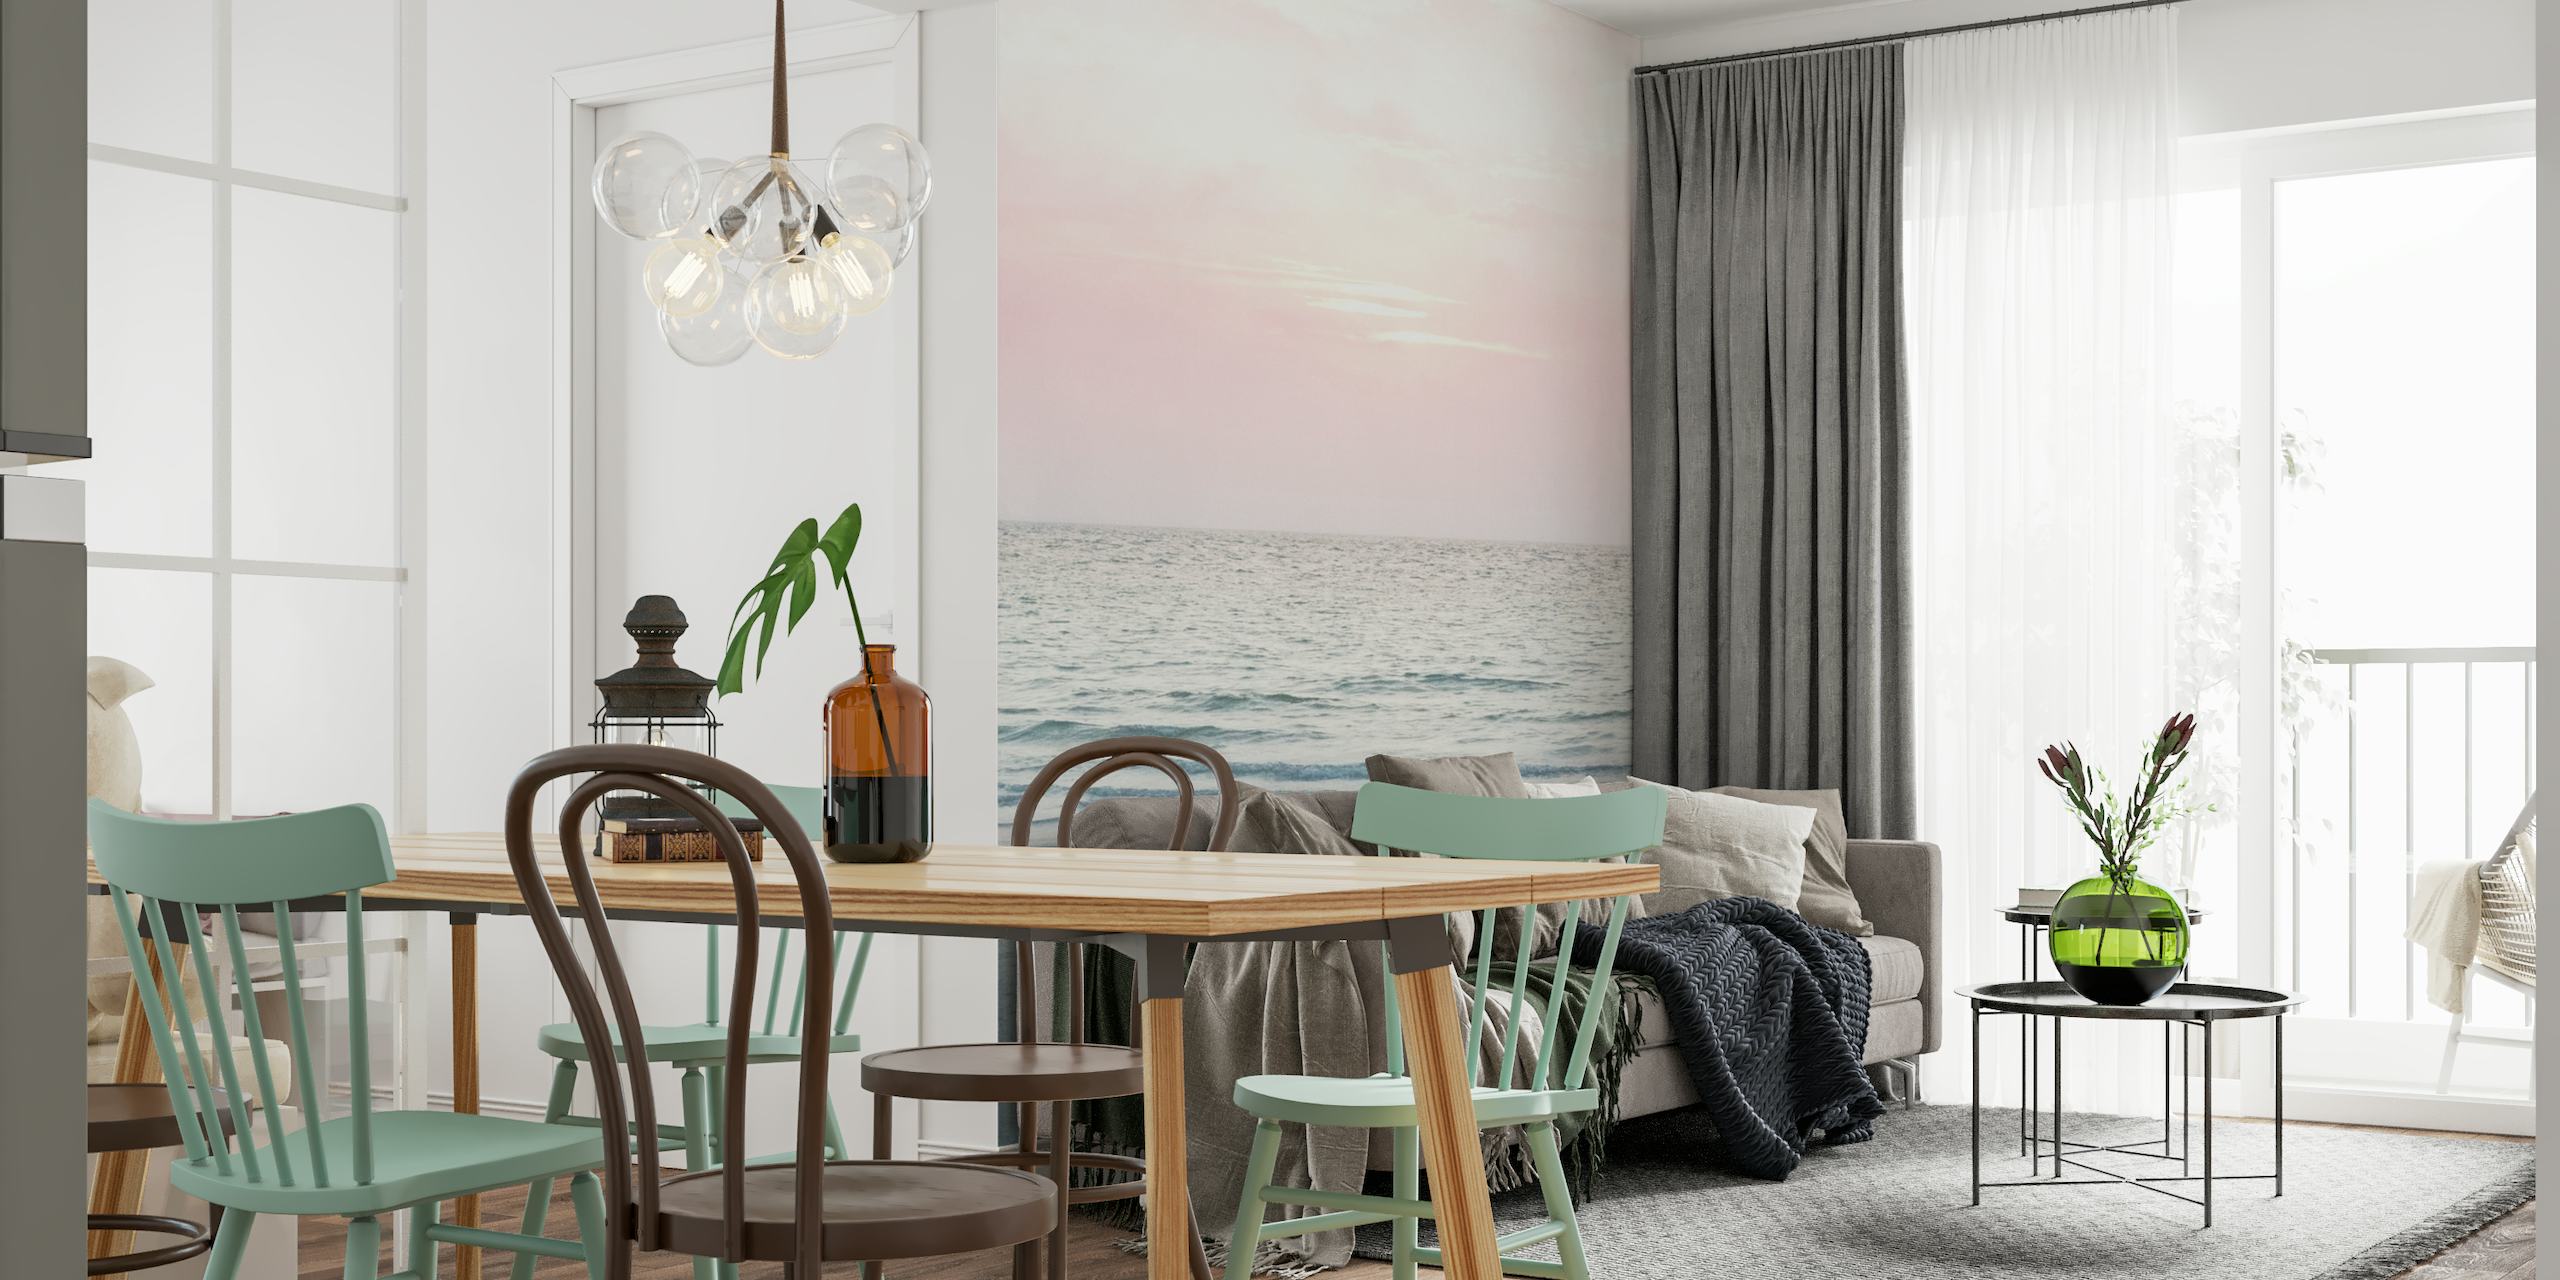 Pastel-colored ocean and sky wall mural with serene sunset vibes.